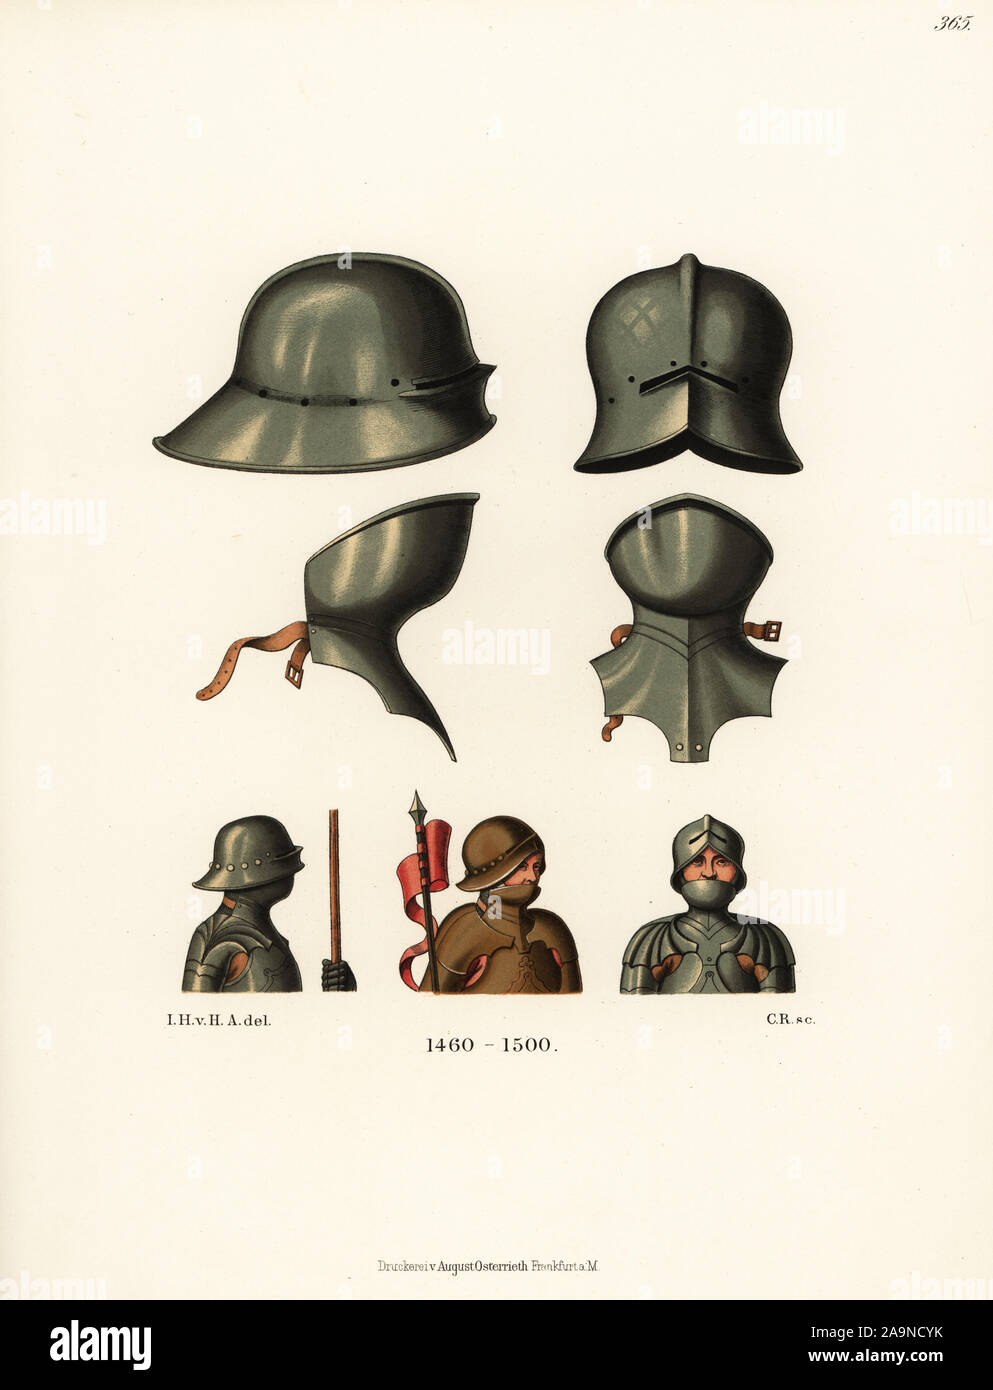 Helmets, sallet helm and gorget neck armour, Germany, late 15th century. Chromolithograph from Hefner-Alteneck's Costumes, Artworks and Appliances from the Middle Ages to the 17th Century, Frankfurt, 1889. Illustration by Dr. Jakob Heinrich von Hefner-Alteneck, lithographed by C. Regnier. Dr. Hefner-Alteneck (1811 - 1903) was a German museum curator, archaeologist, art historian, illustrator and etcher. Stock Photo